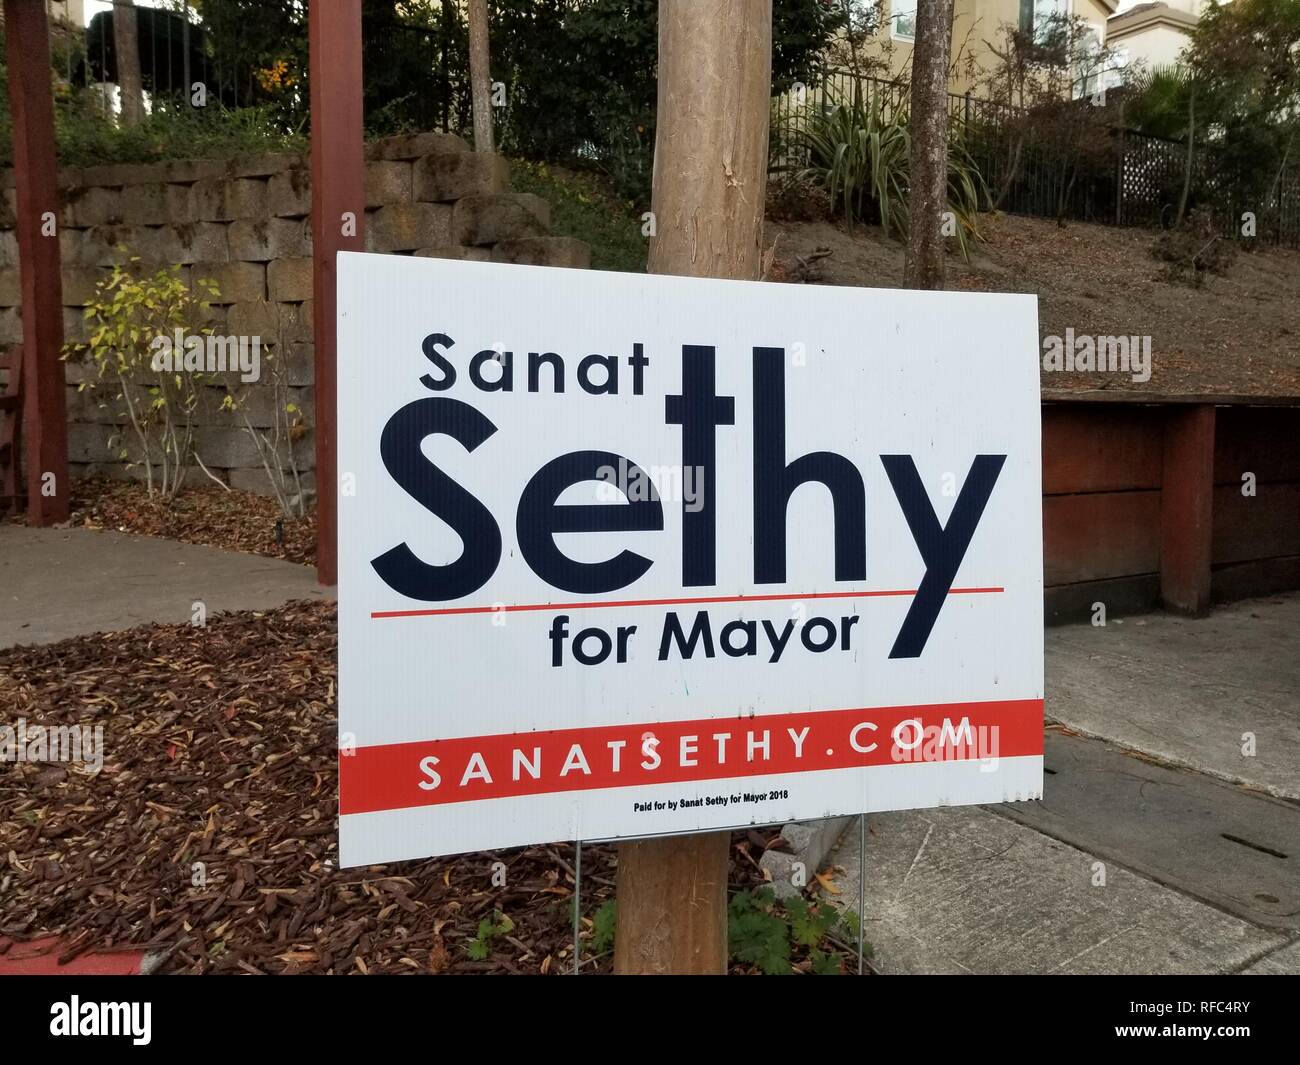 Close-up photograph of political campaign sign for local mayoral candidate Sanat Sethy in San Ramon, California, October 30, 2018. () Stock Photo